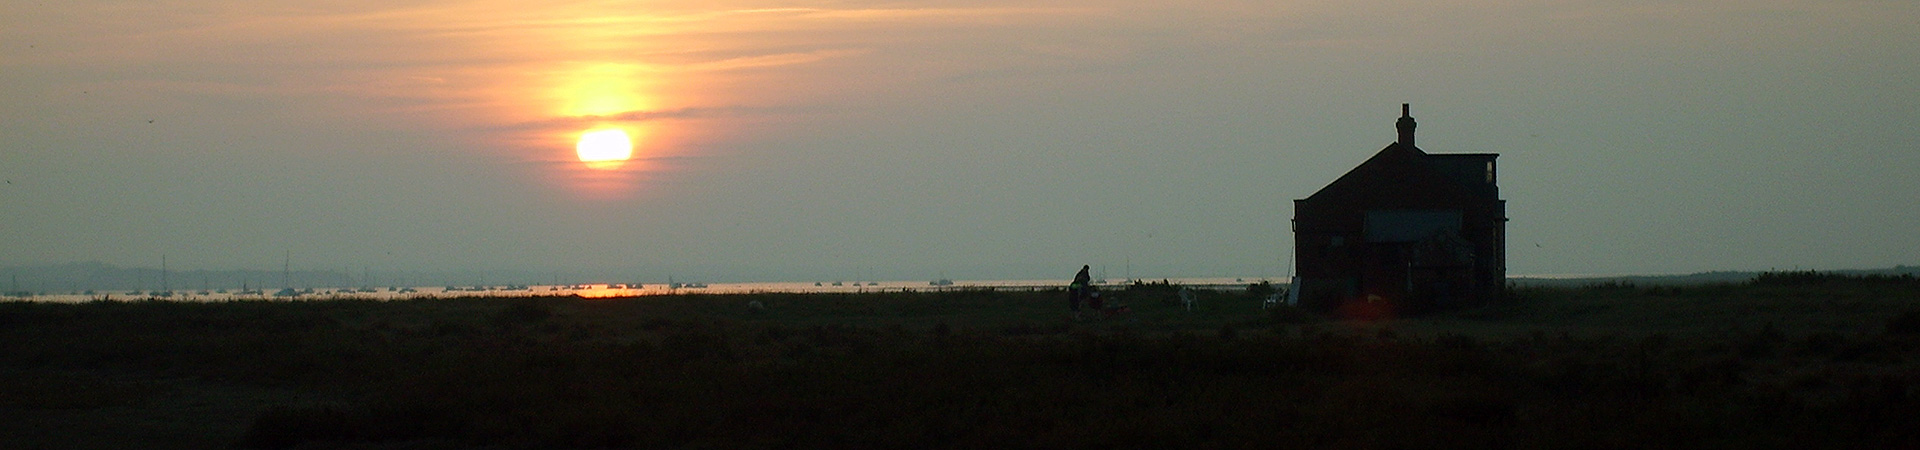 The Watch House at sunset on Blakeney Point